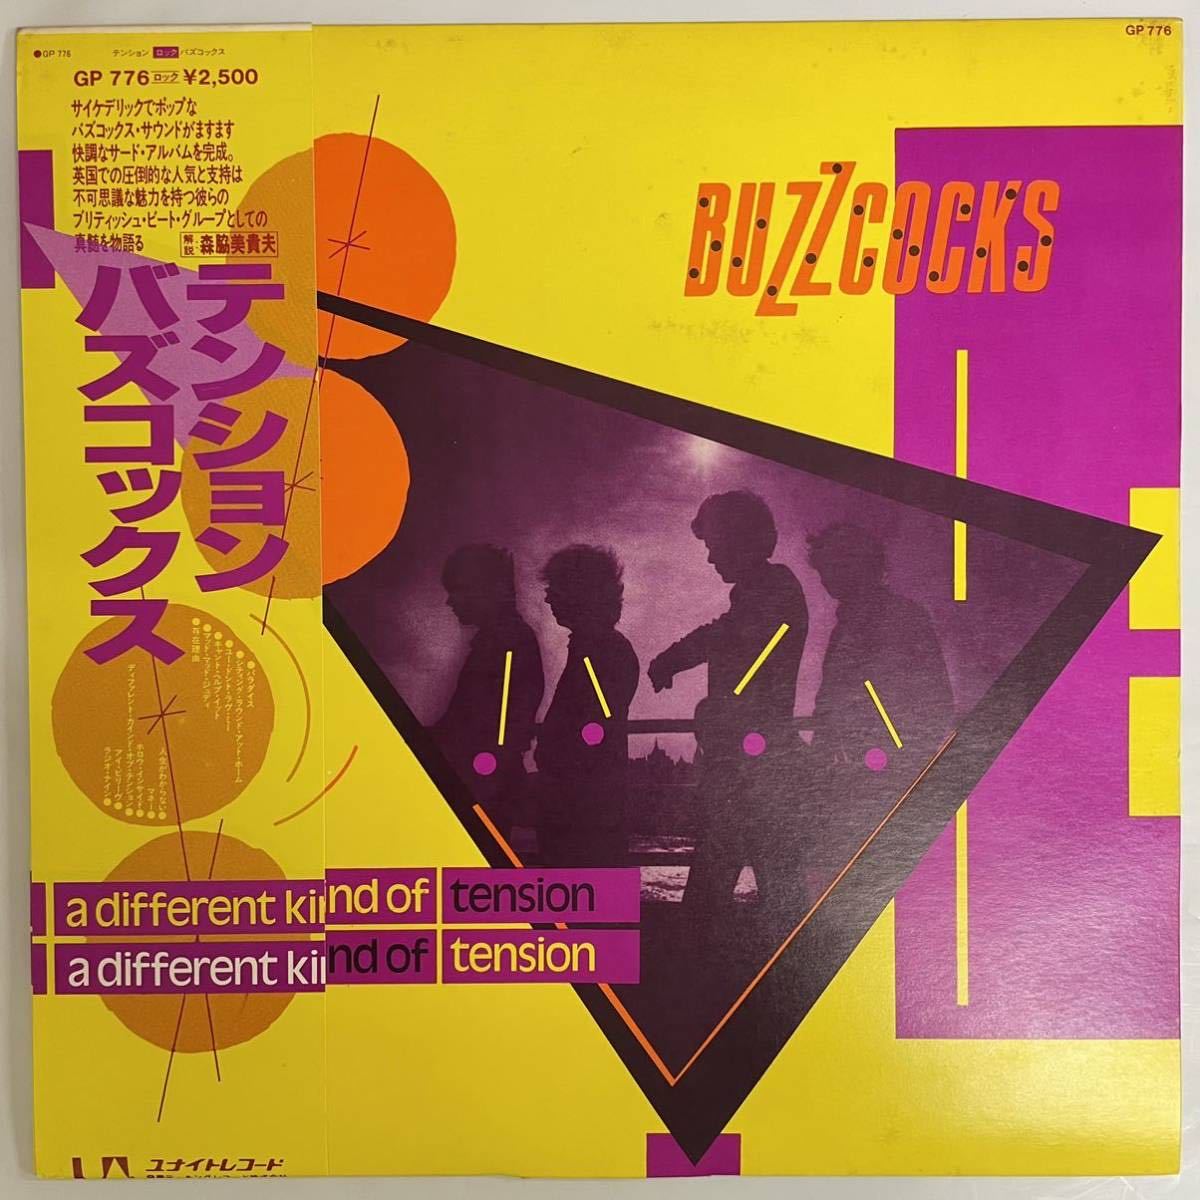 LP / Buzzcocks A Different Kind Of Tension / GP 776 / w. OBI , INCERT / バズコックス_画像1